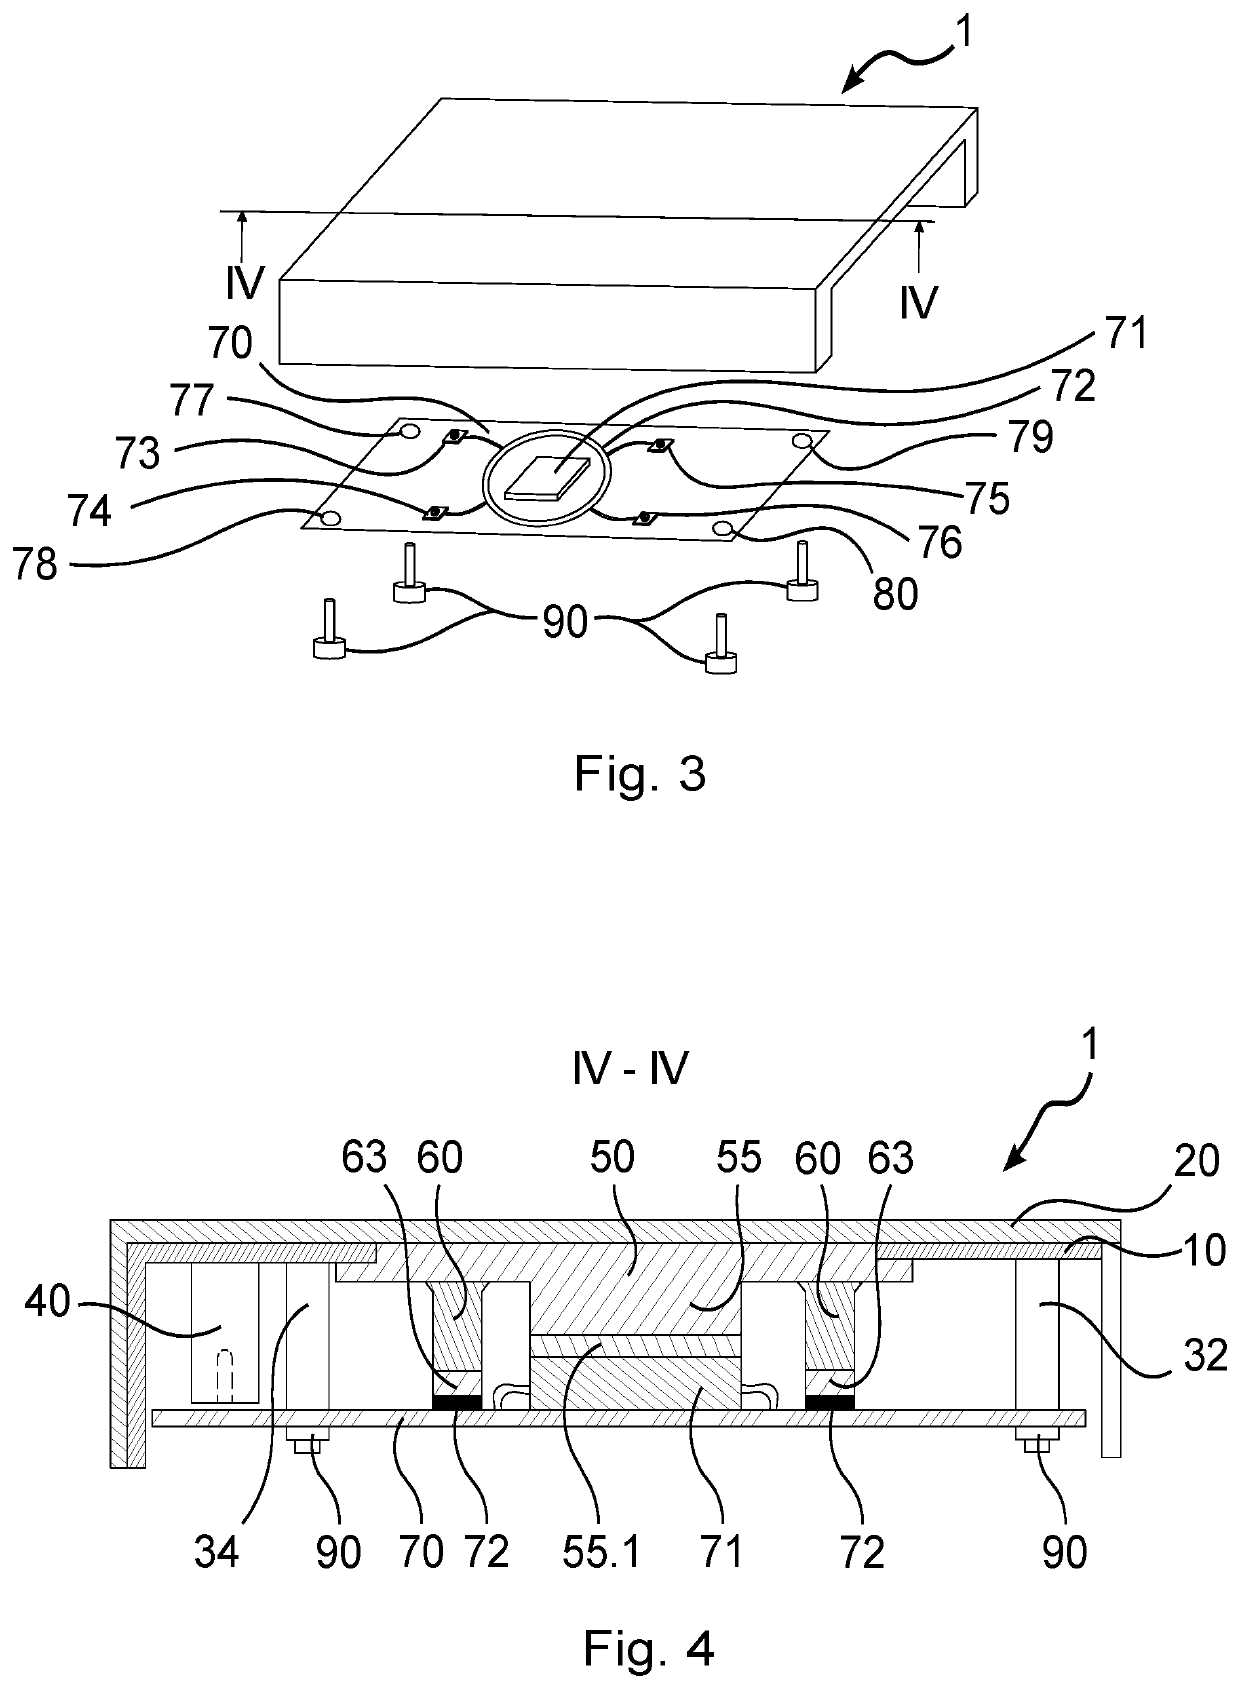 Single-piece cover for an electronic device